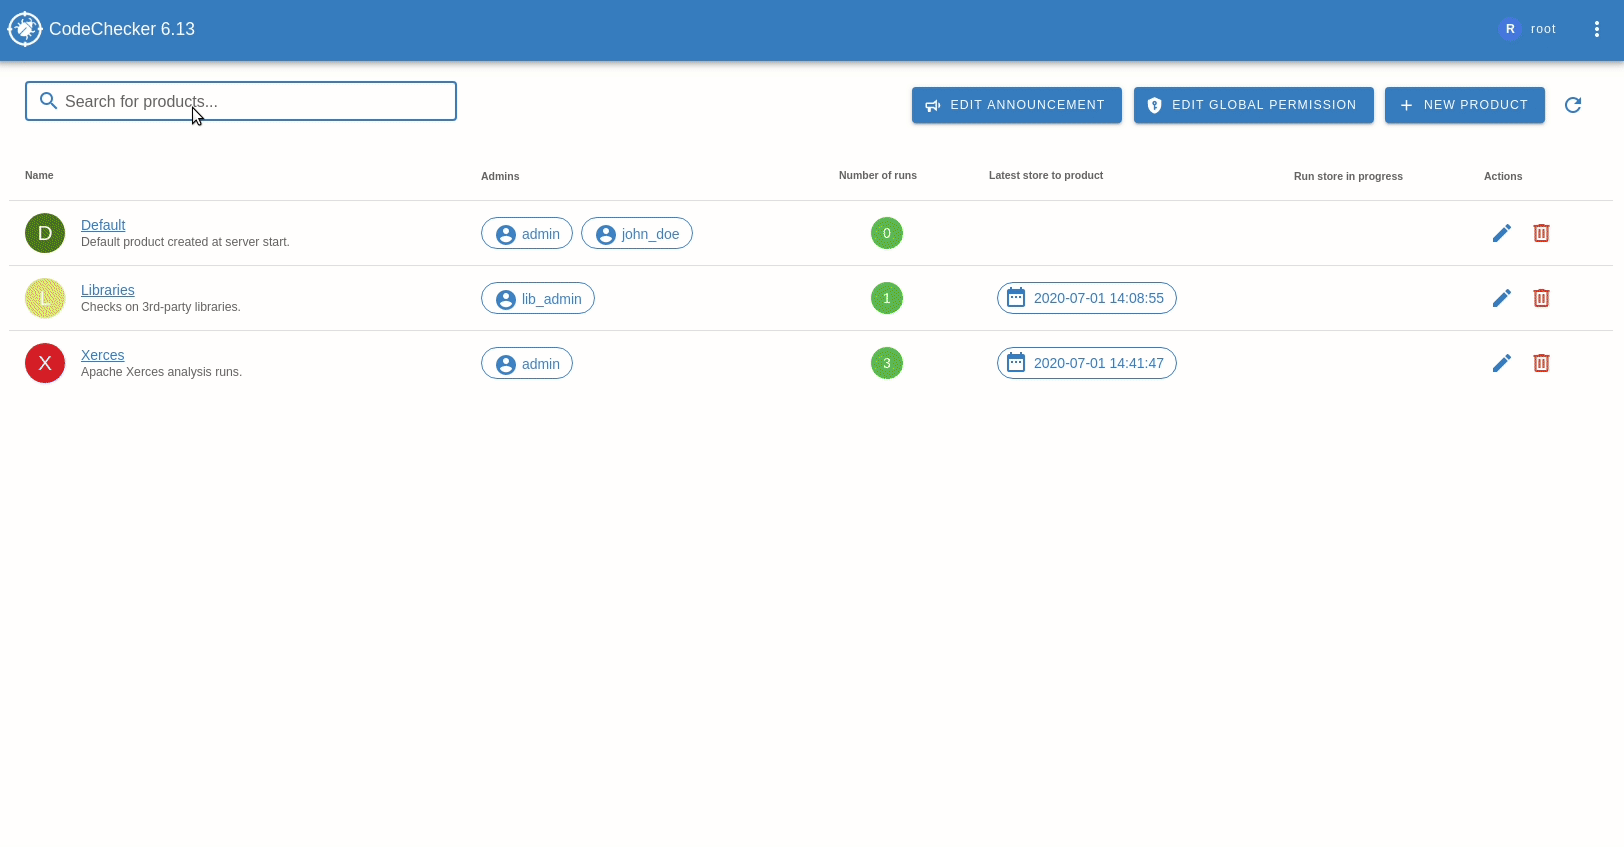 Web interface showing list of analysed projects and bugs